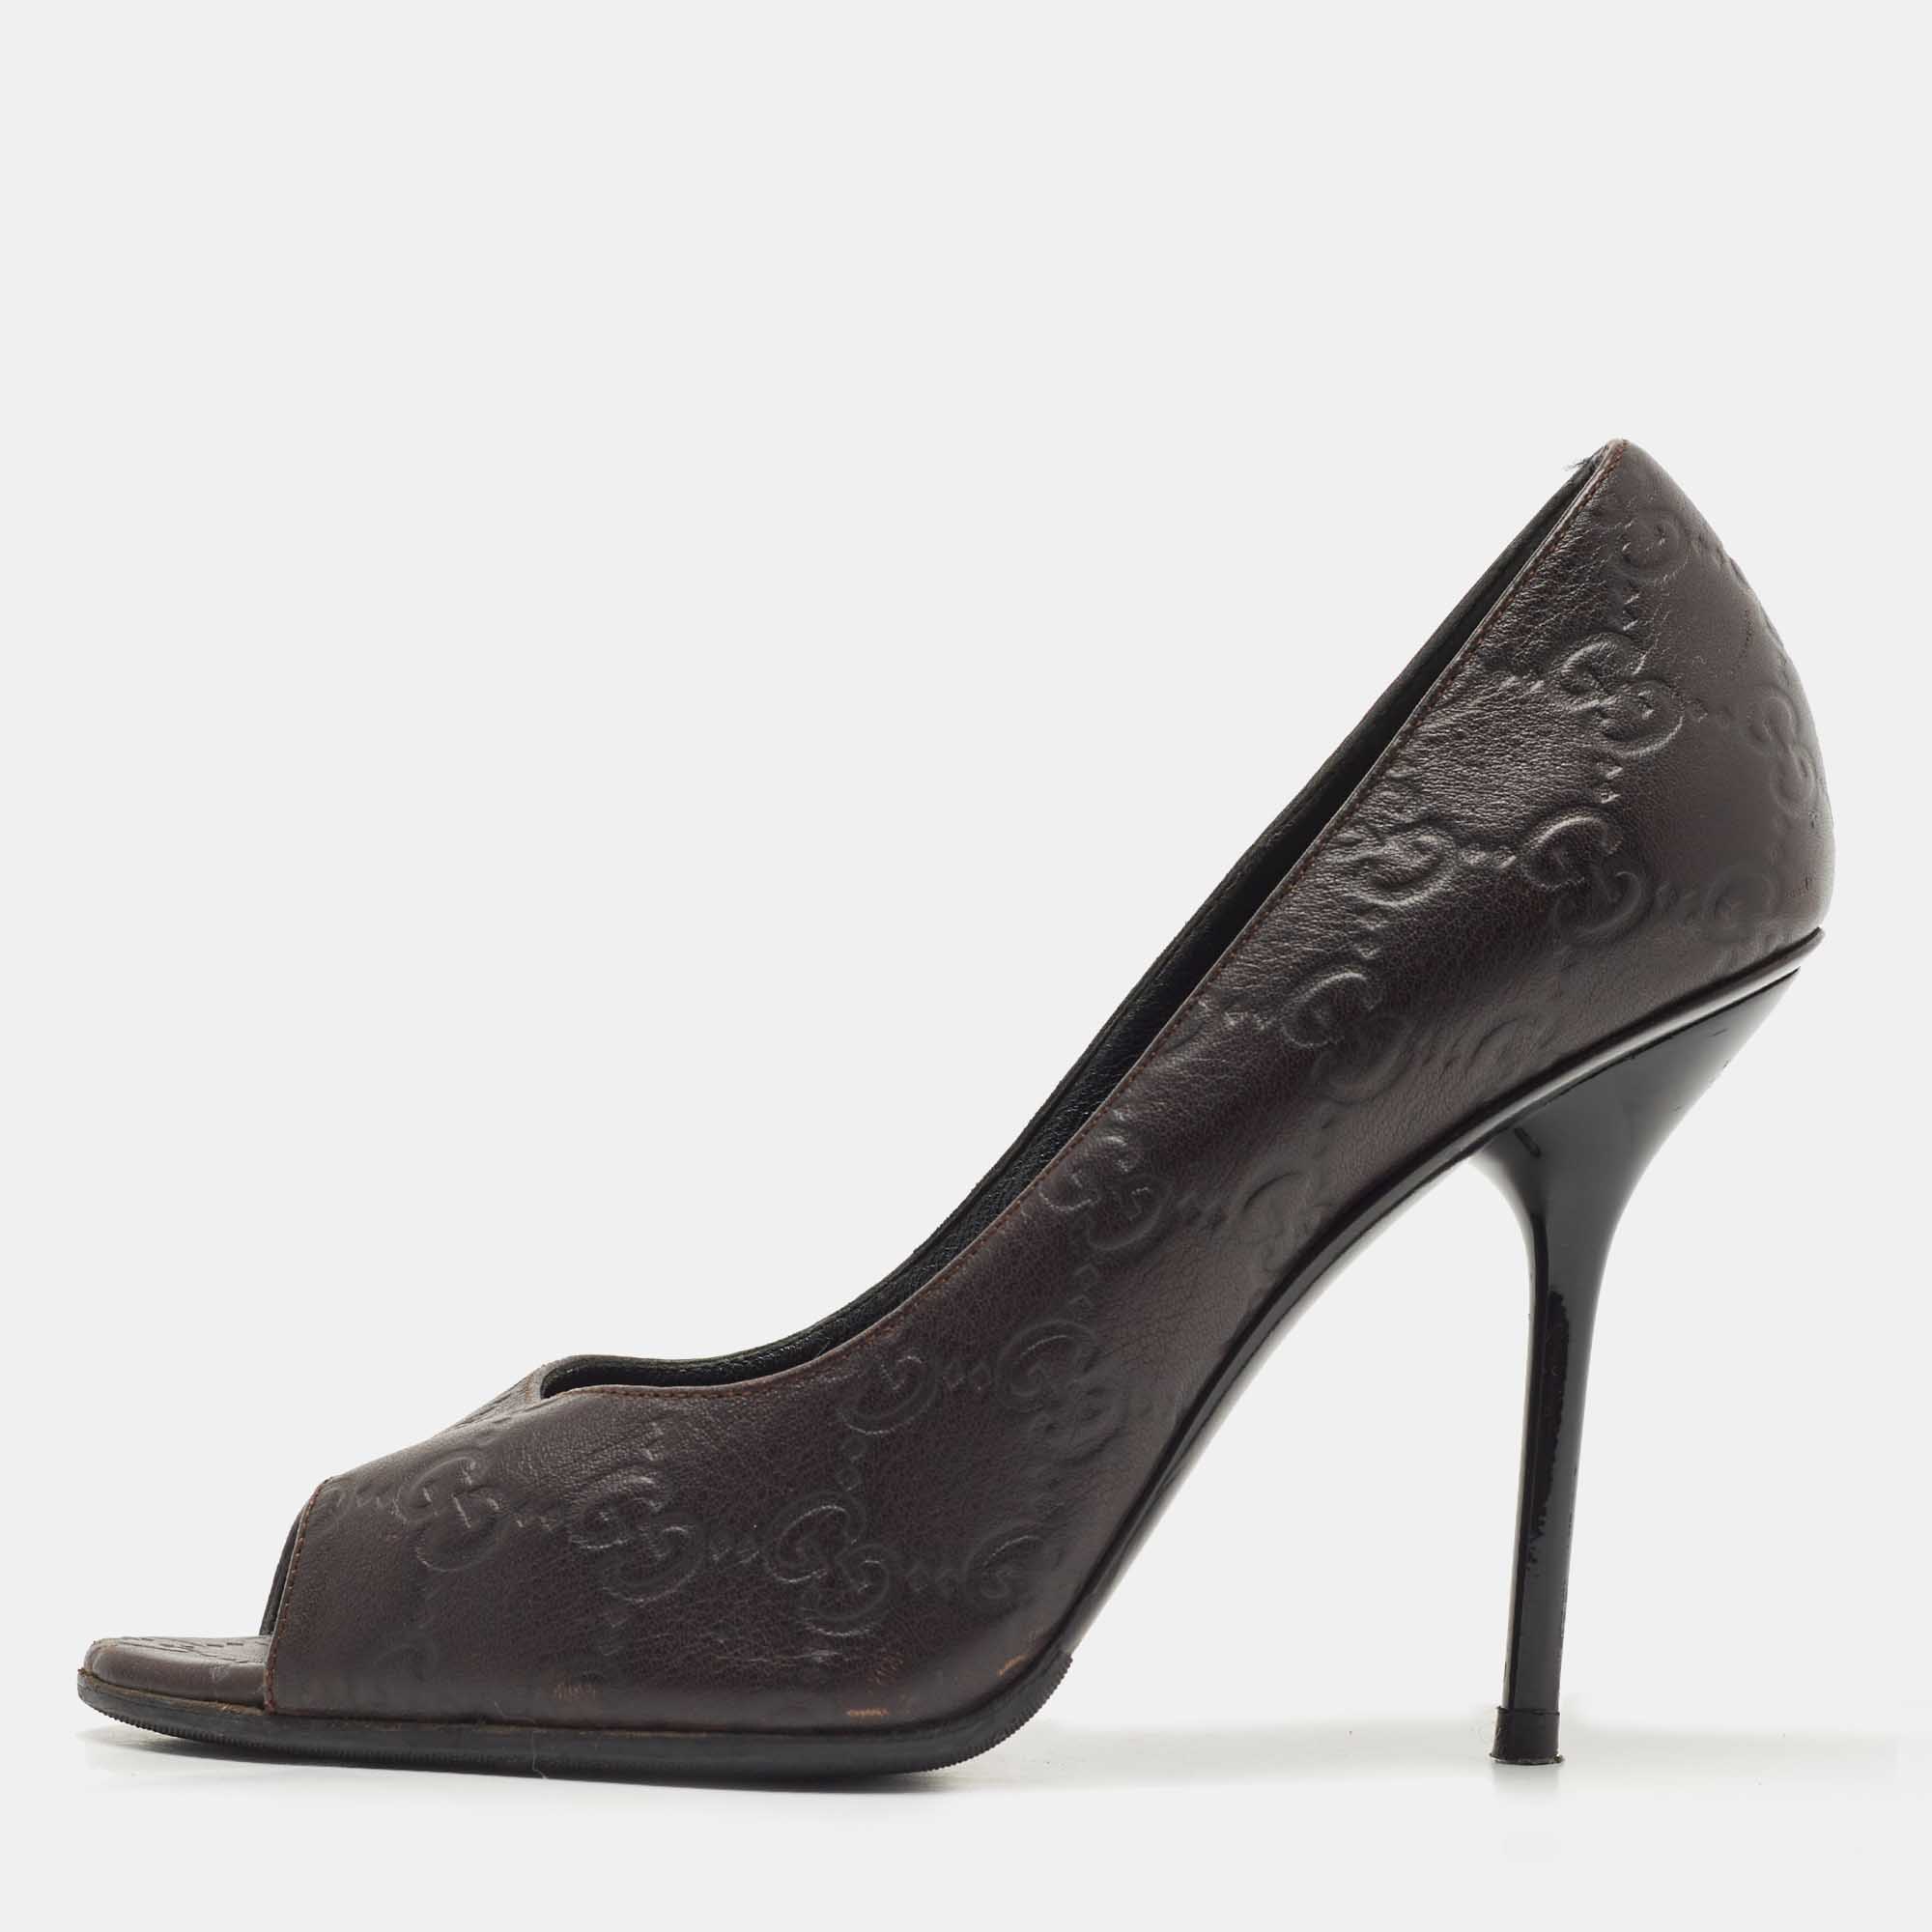 Look chic and make an elegant style statement in this pair of Guccissima leather pumps. These elegant Gucci pumps are your favorite go to option for any special occasion. The plush design of these classic black pumps including peep toes and high heels will lend a stylish touch to your look.